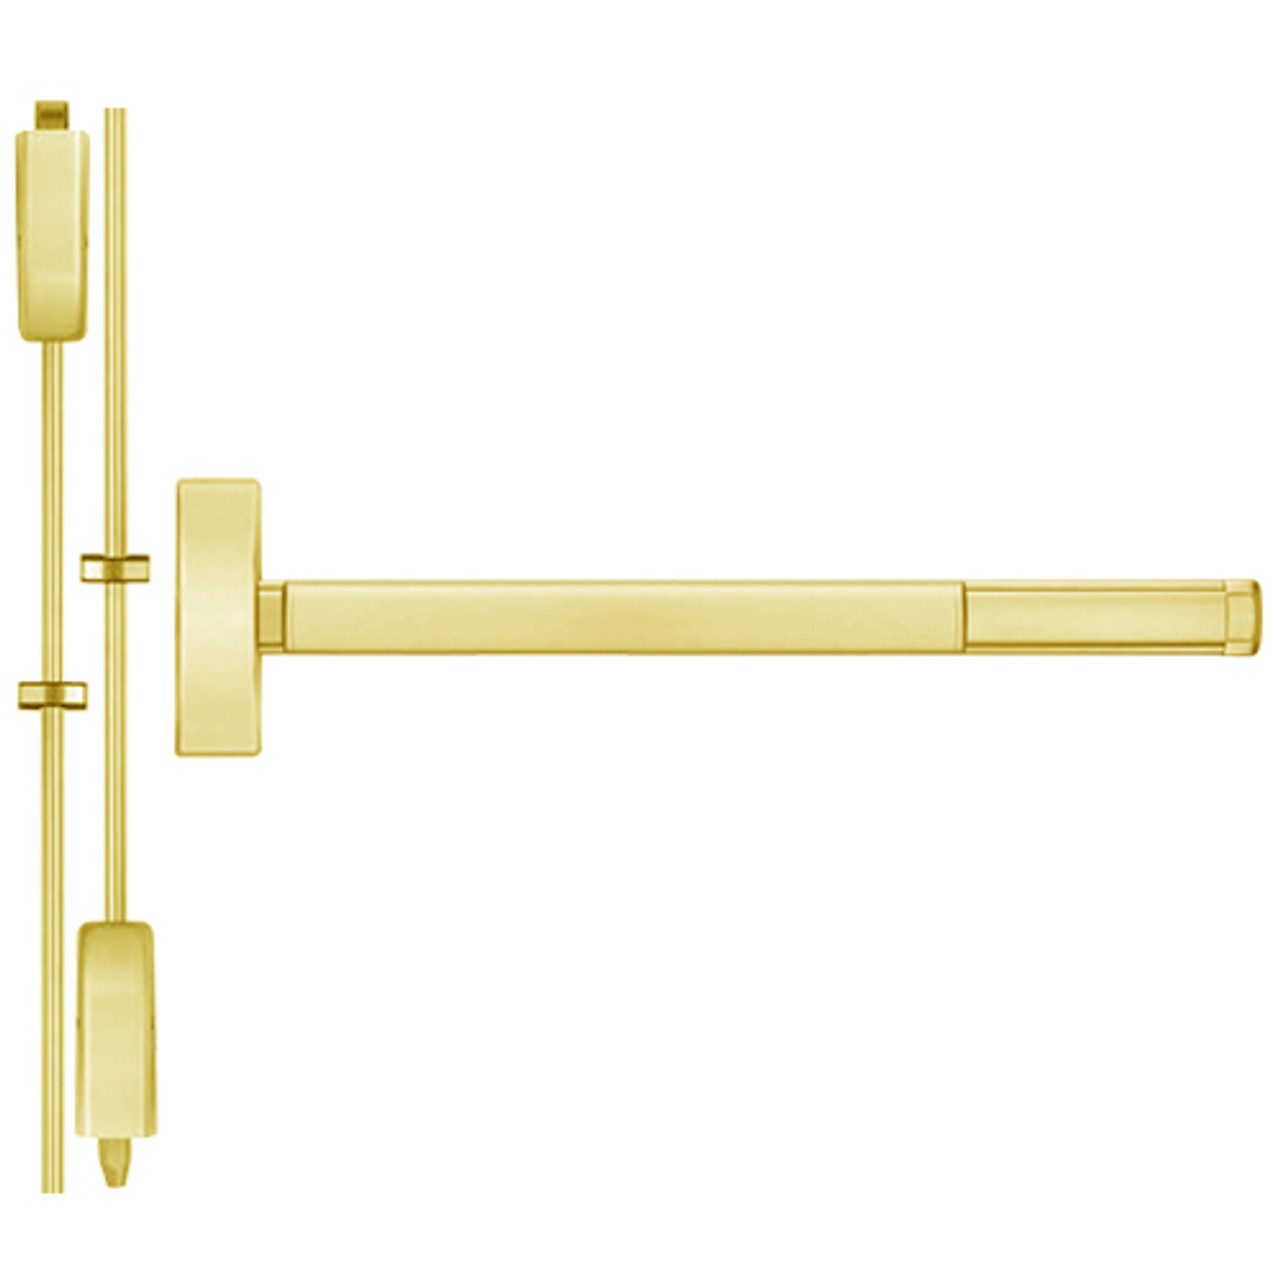 TS2208LBR-605-48 PHI 2200 Series Non Fire Rated Apex Surface Vertical Rod Device with Touchbar Monitoring Switch Prepped for Key Controls Lever/Knob in Bright Brass Finish